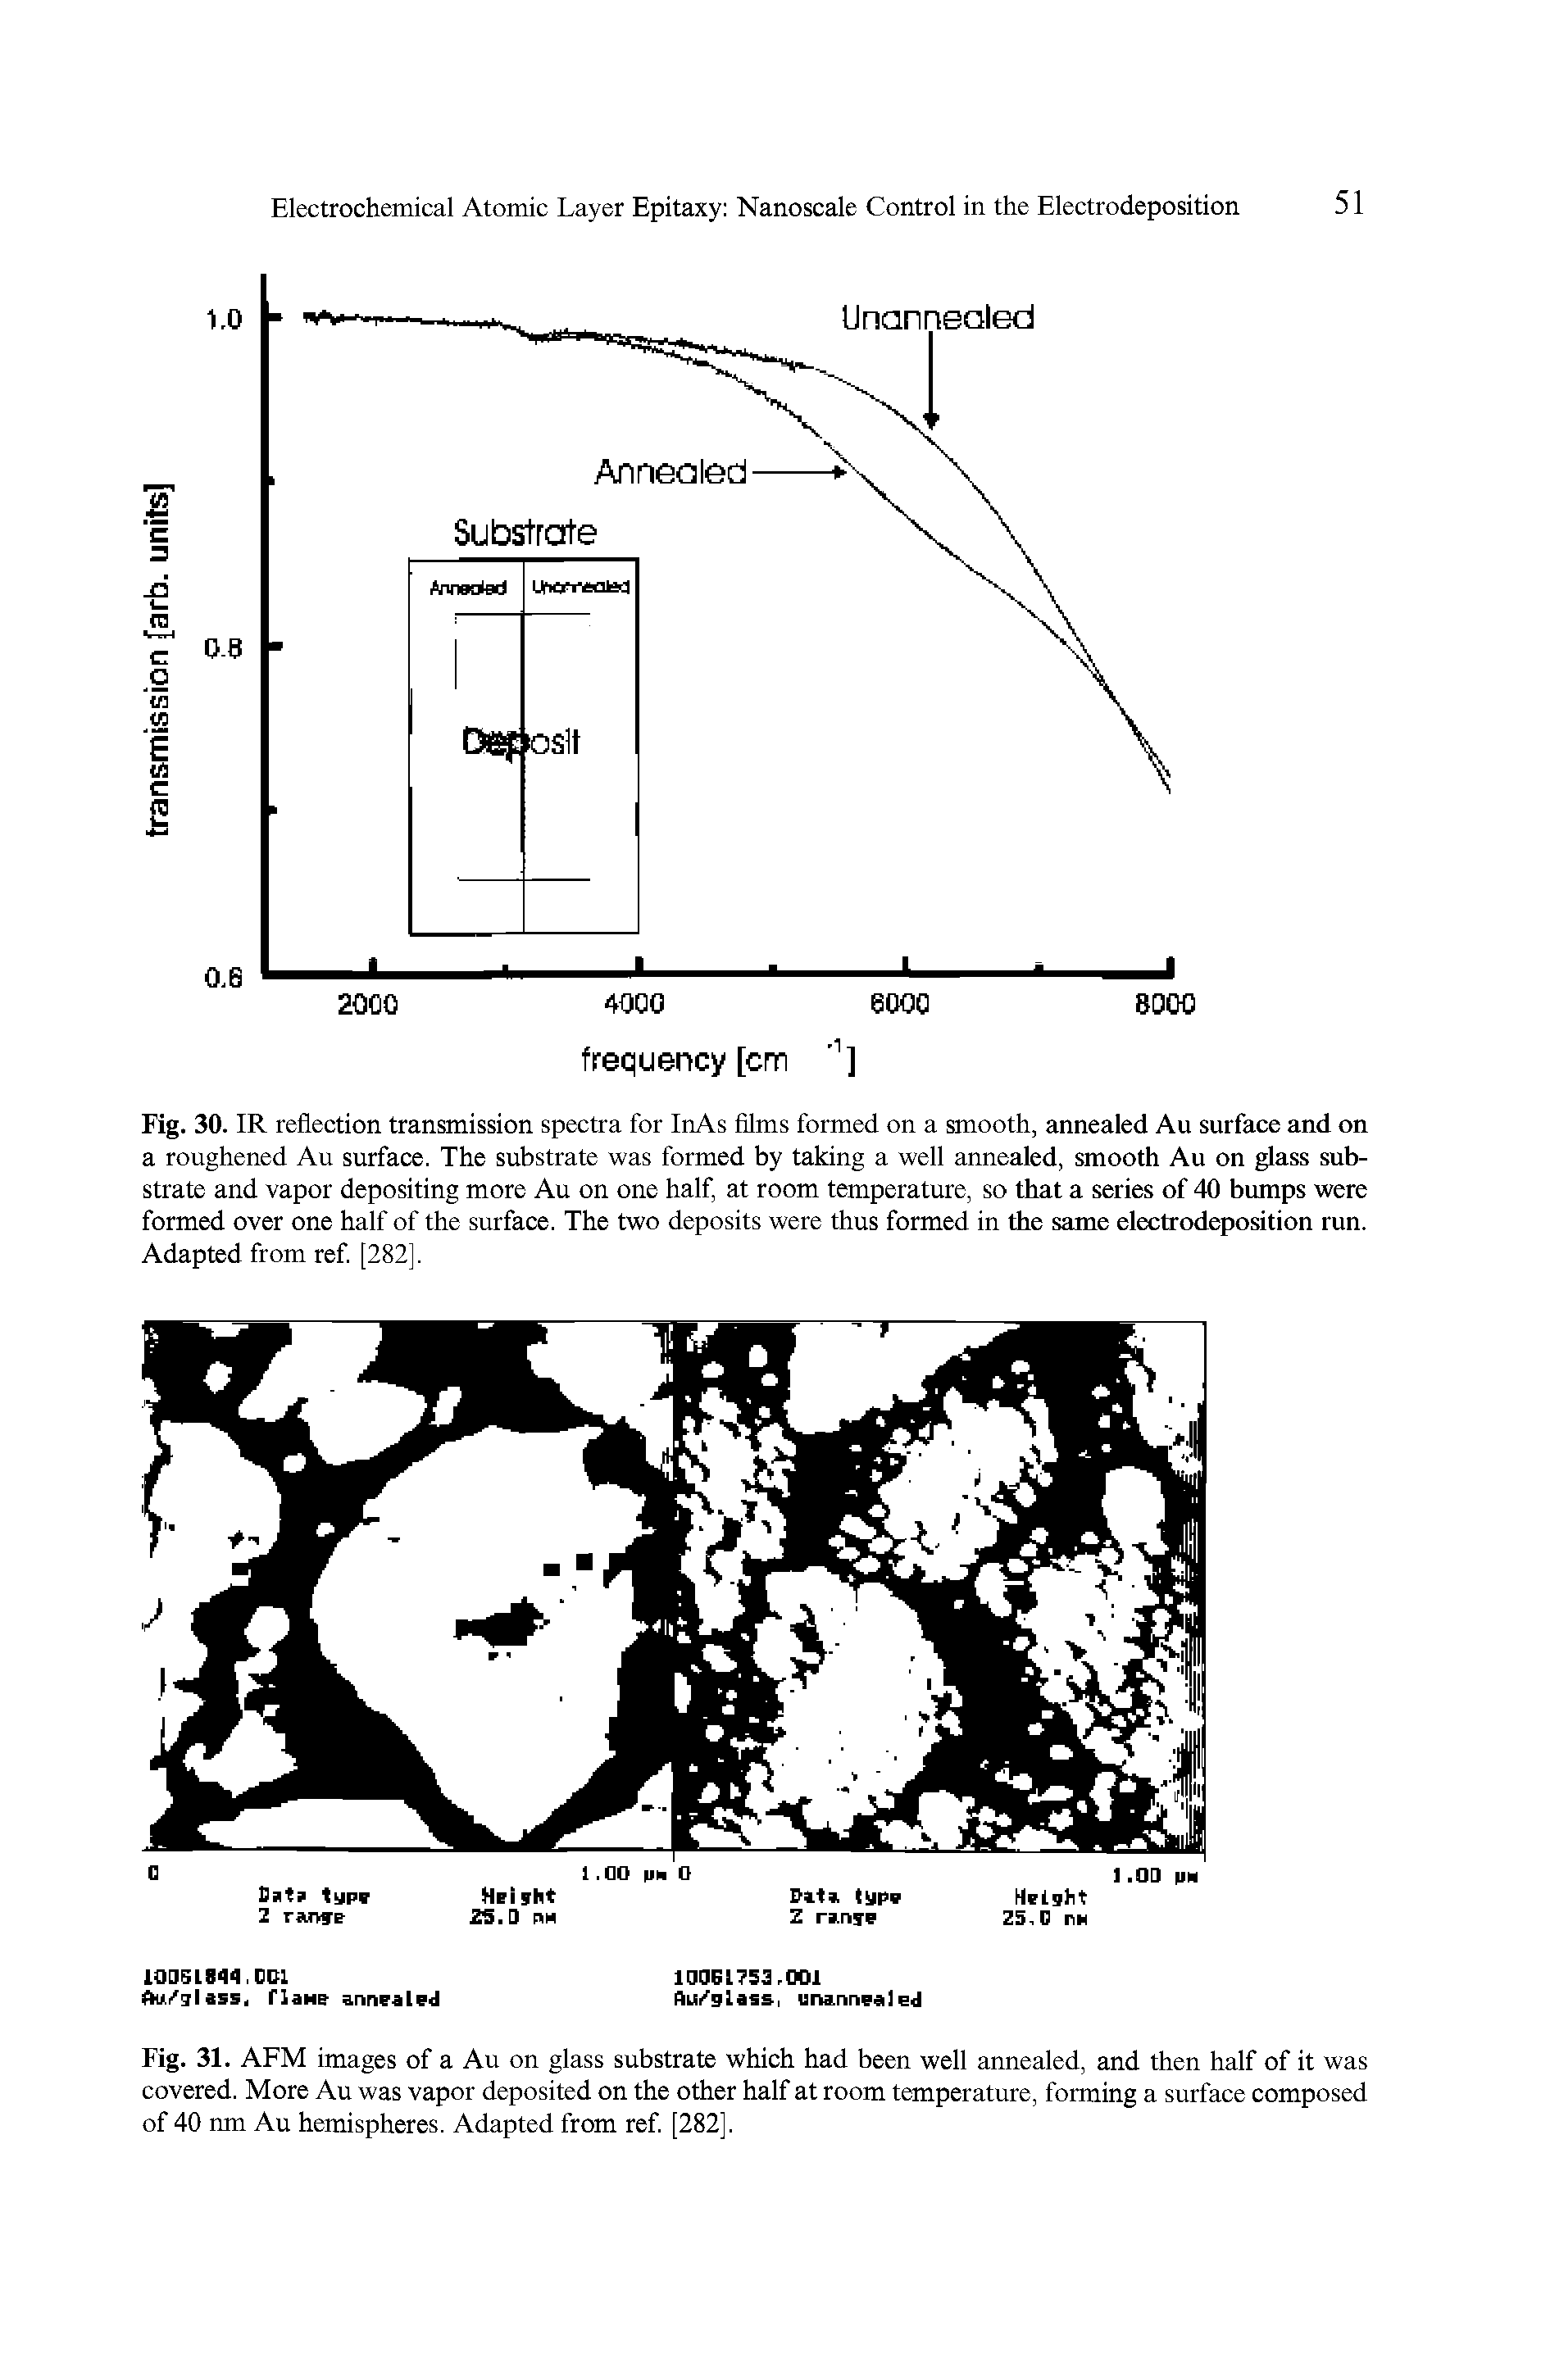 Fig. 30. IR reflection transmission spectra for InAs films formed on a smooth, annealed Au surface and on a roughened Au surface. The substrate was formed by taking a well annealed, smooth Au on glass substrate and vapor depositing more Au on one half, at room temperature, so that a series of 40 bumps were formed over one half of the surface. The two deposits were thus formed in the same electrodeposition run. Adapted from ref. [282],...